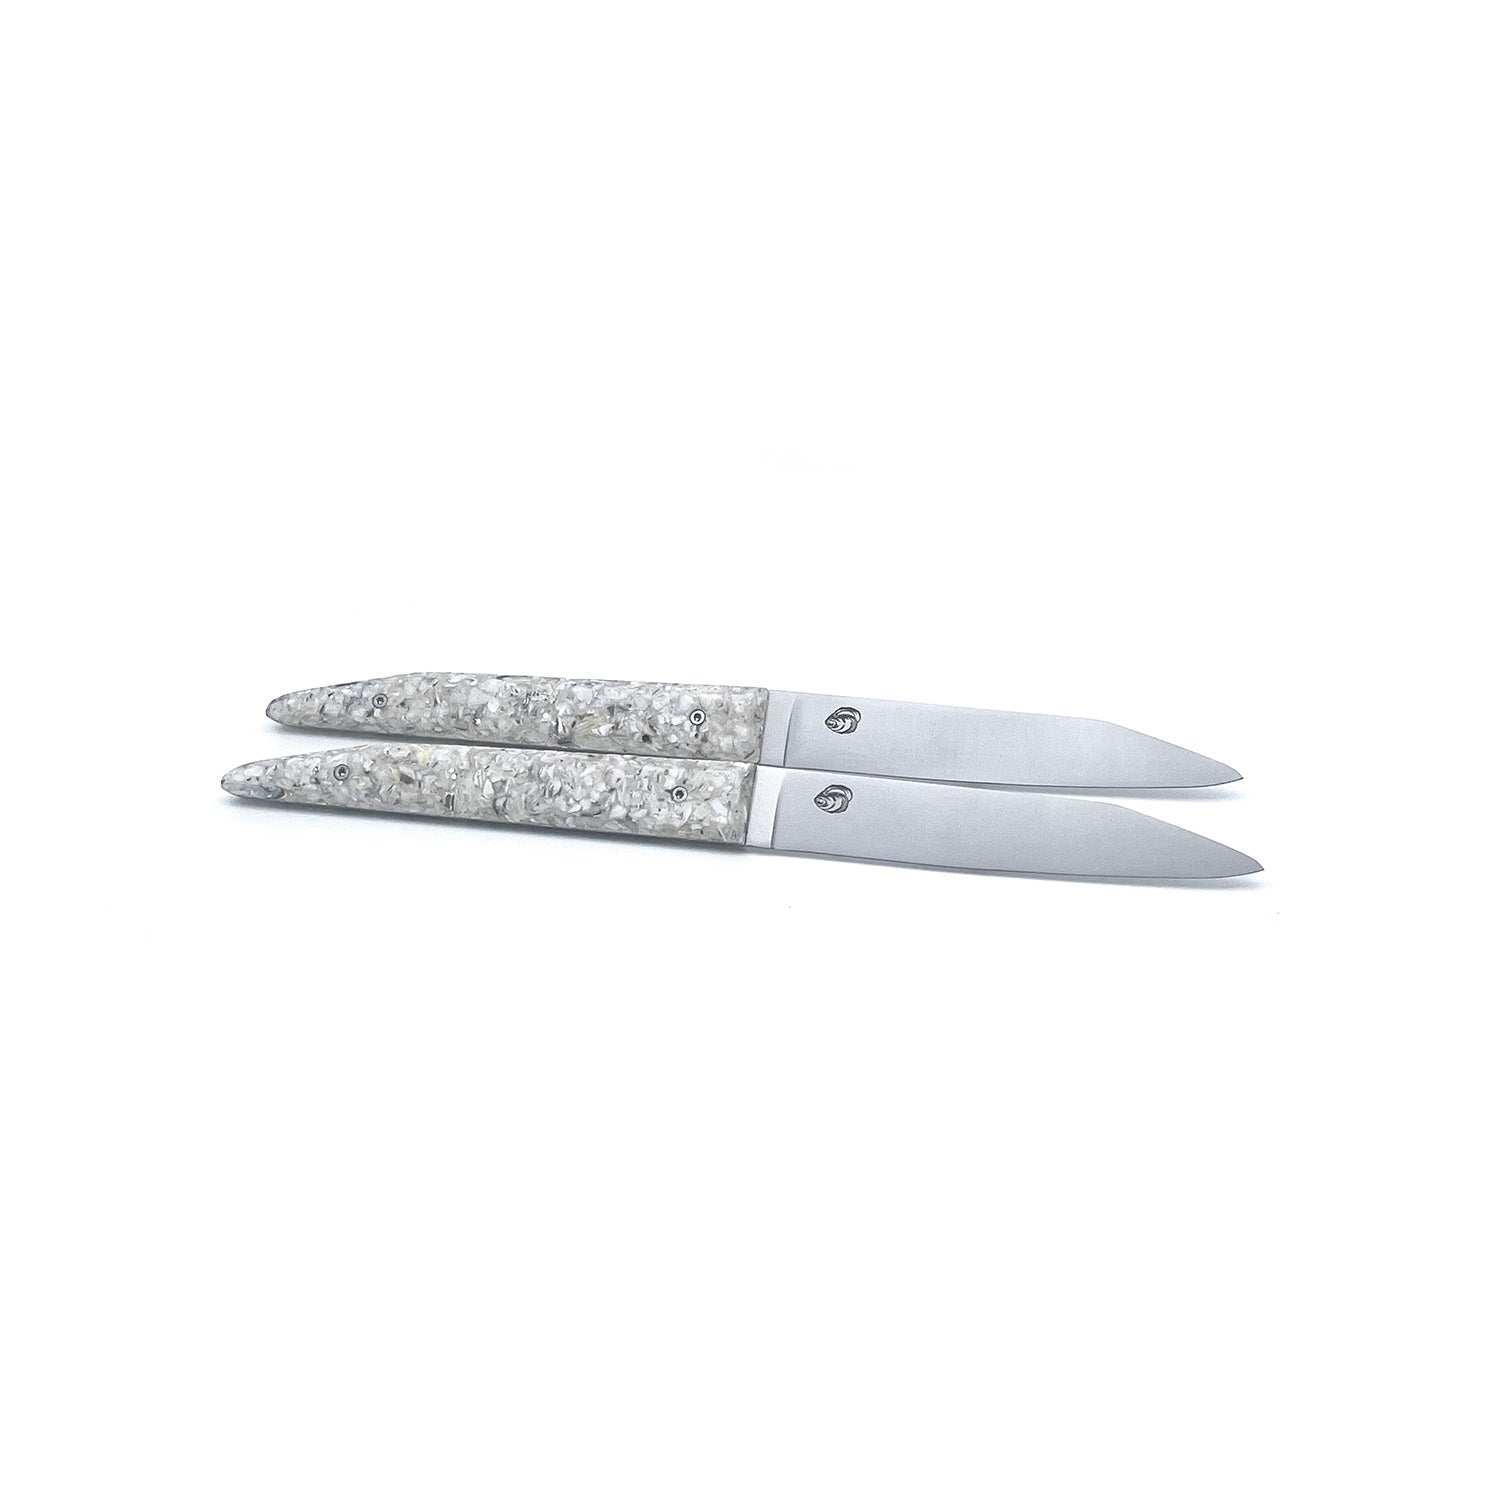 Duo box: 2 table knives with oyster shell handles